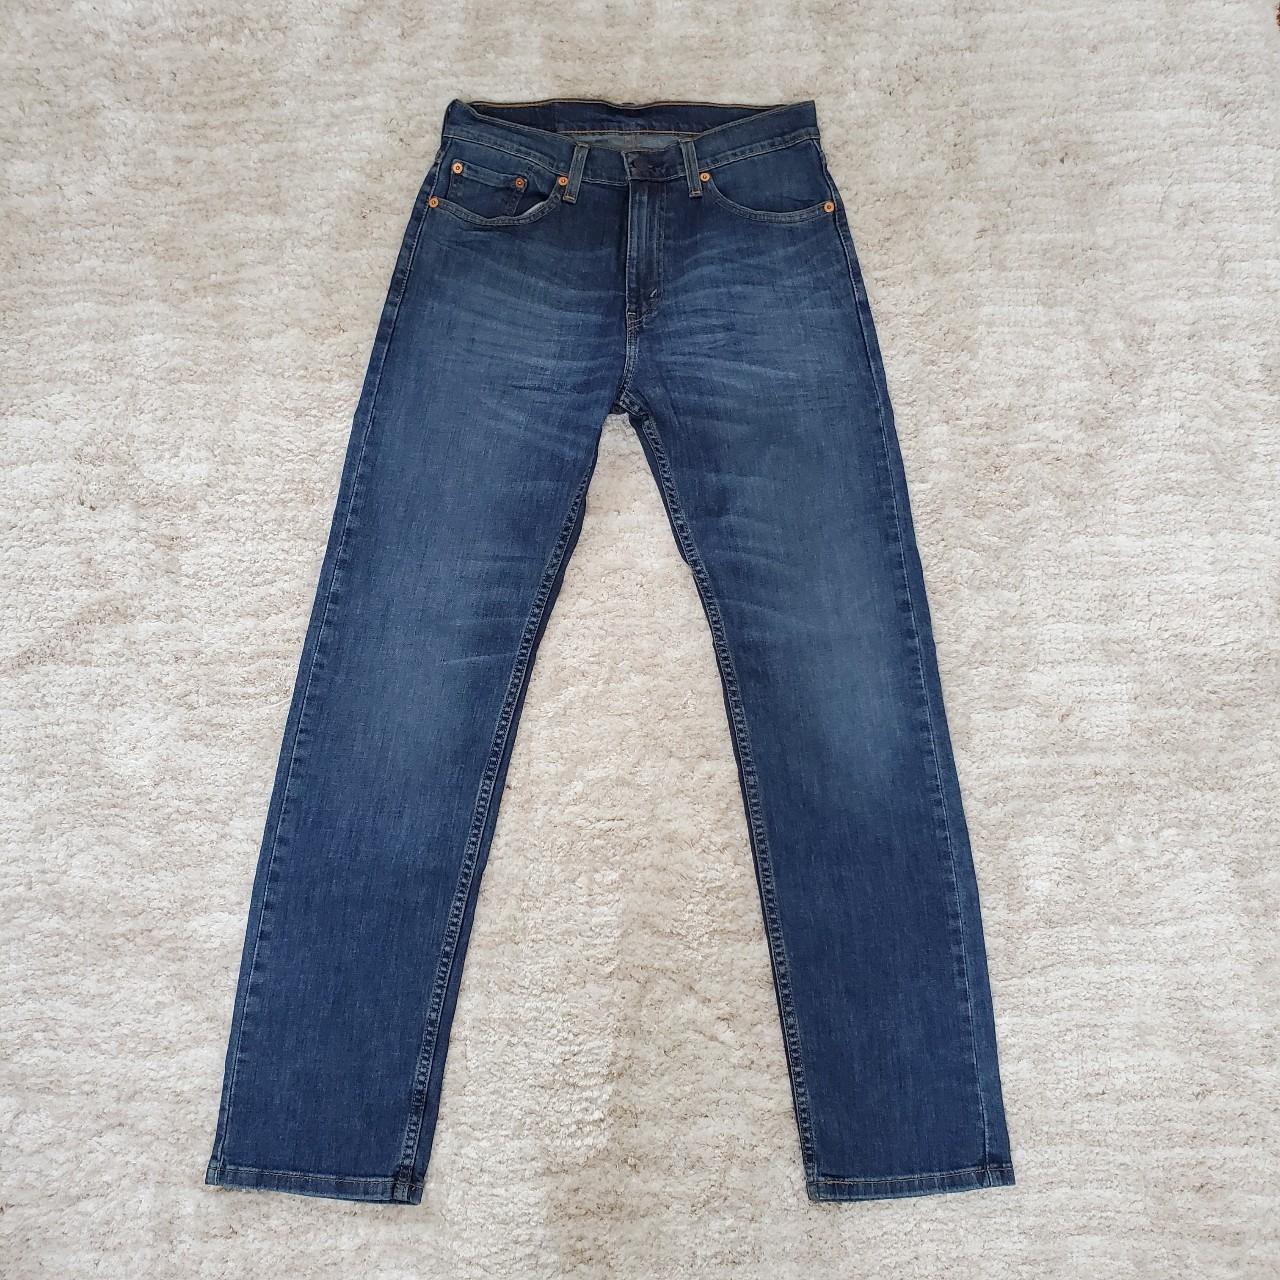 Levi's 505 jeans Check out my other listings.... - Depop